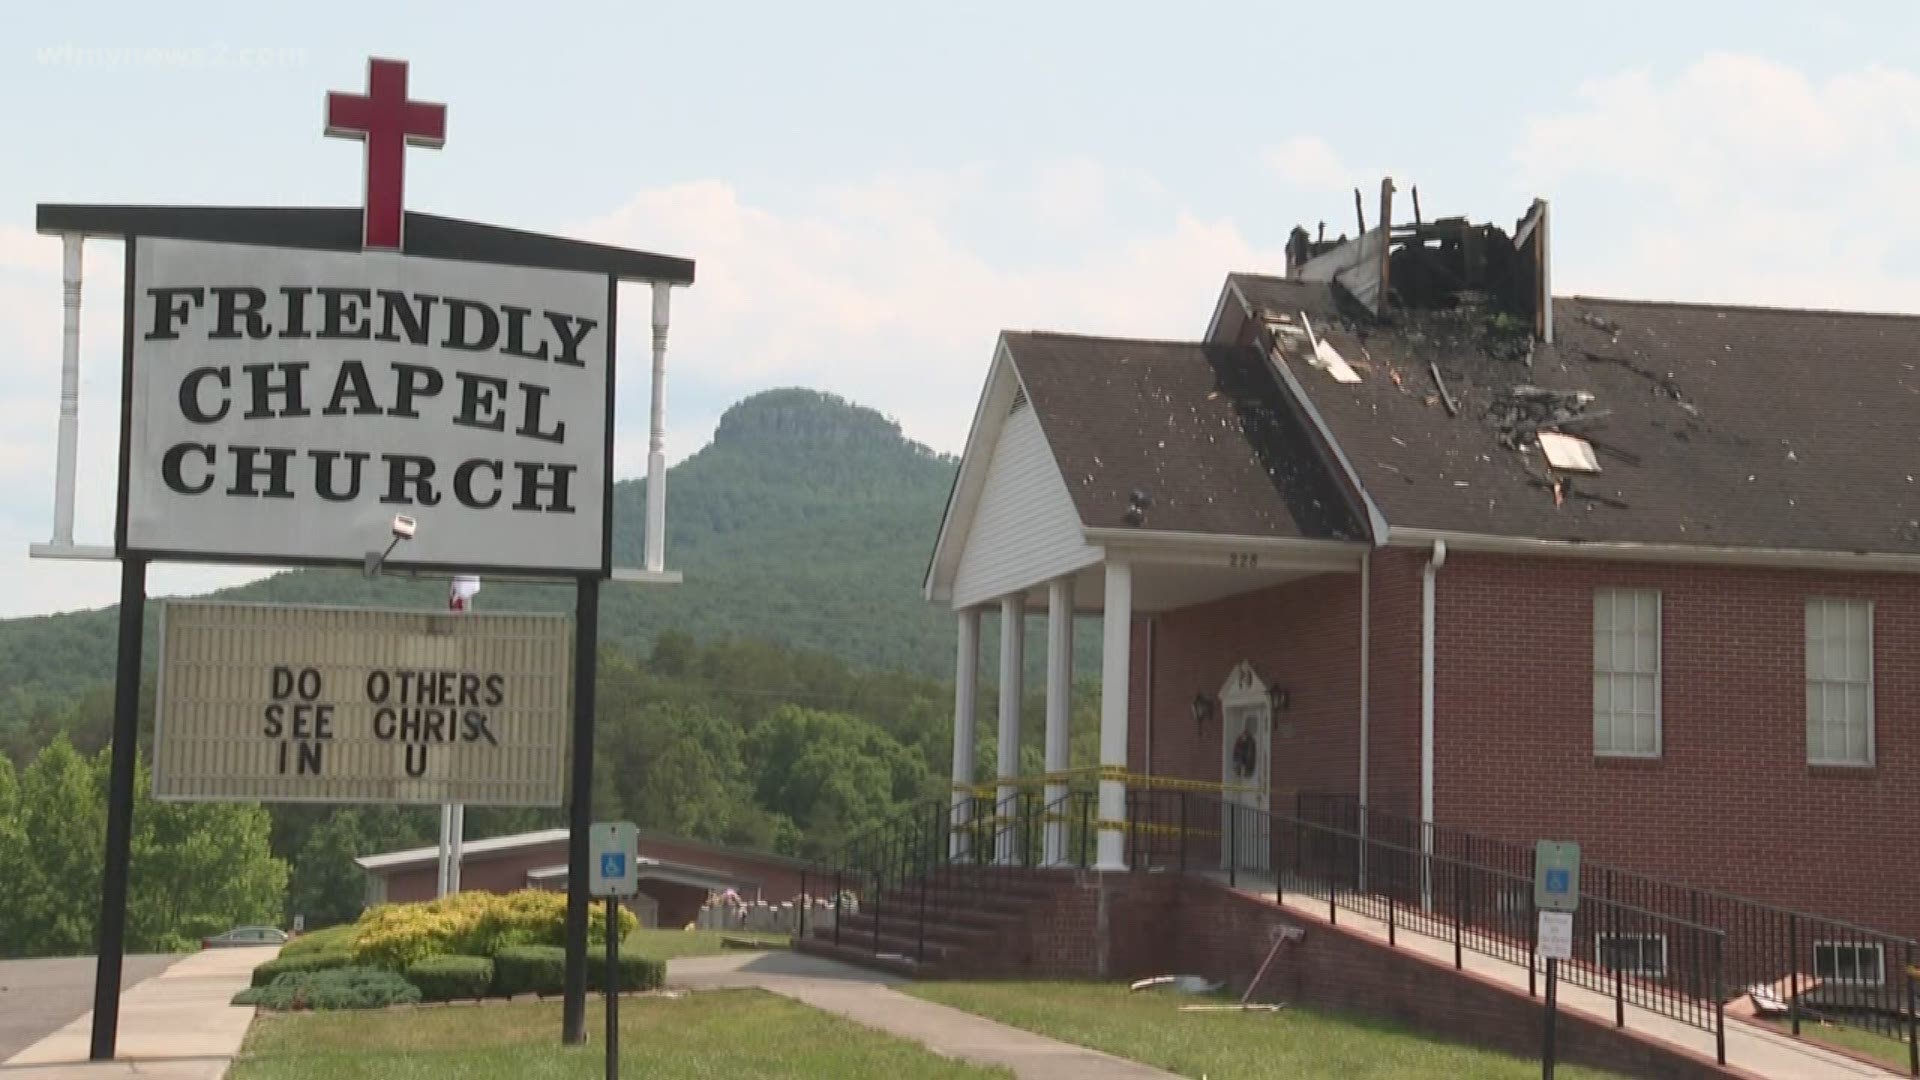 Last night’s storms were enough to strike a Pilot Mountain church with lightning twice setting it on fire